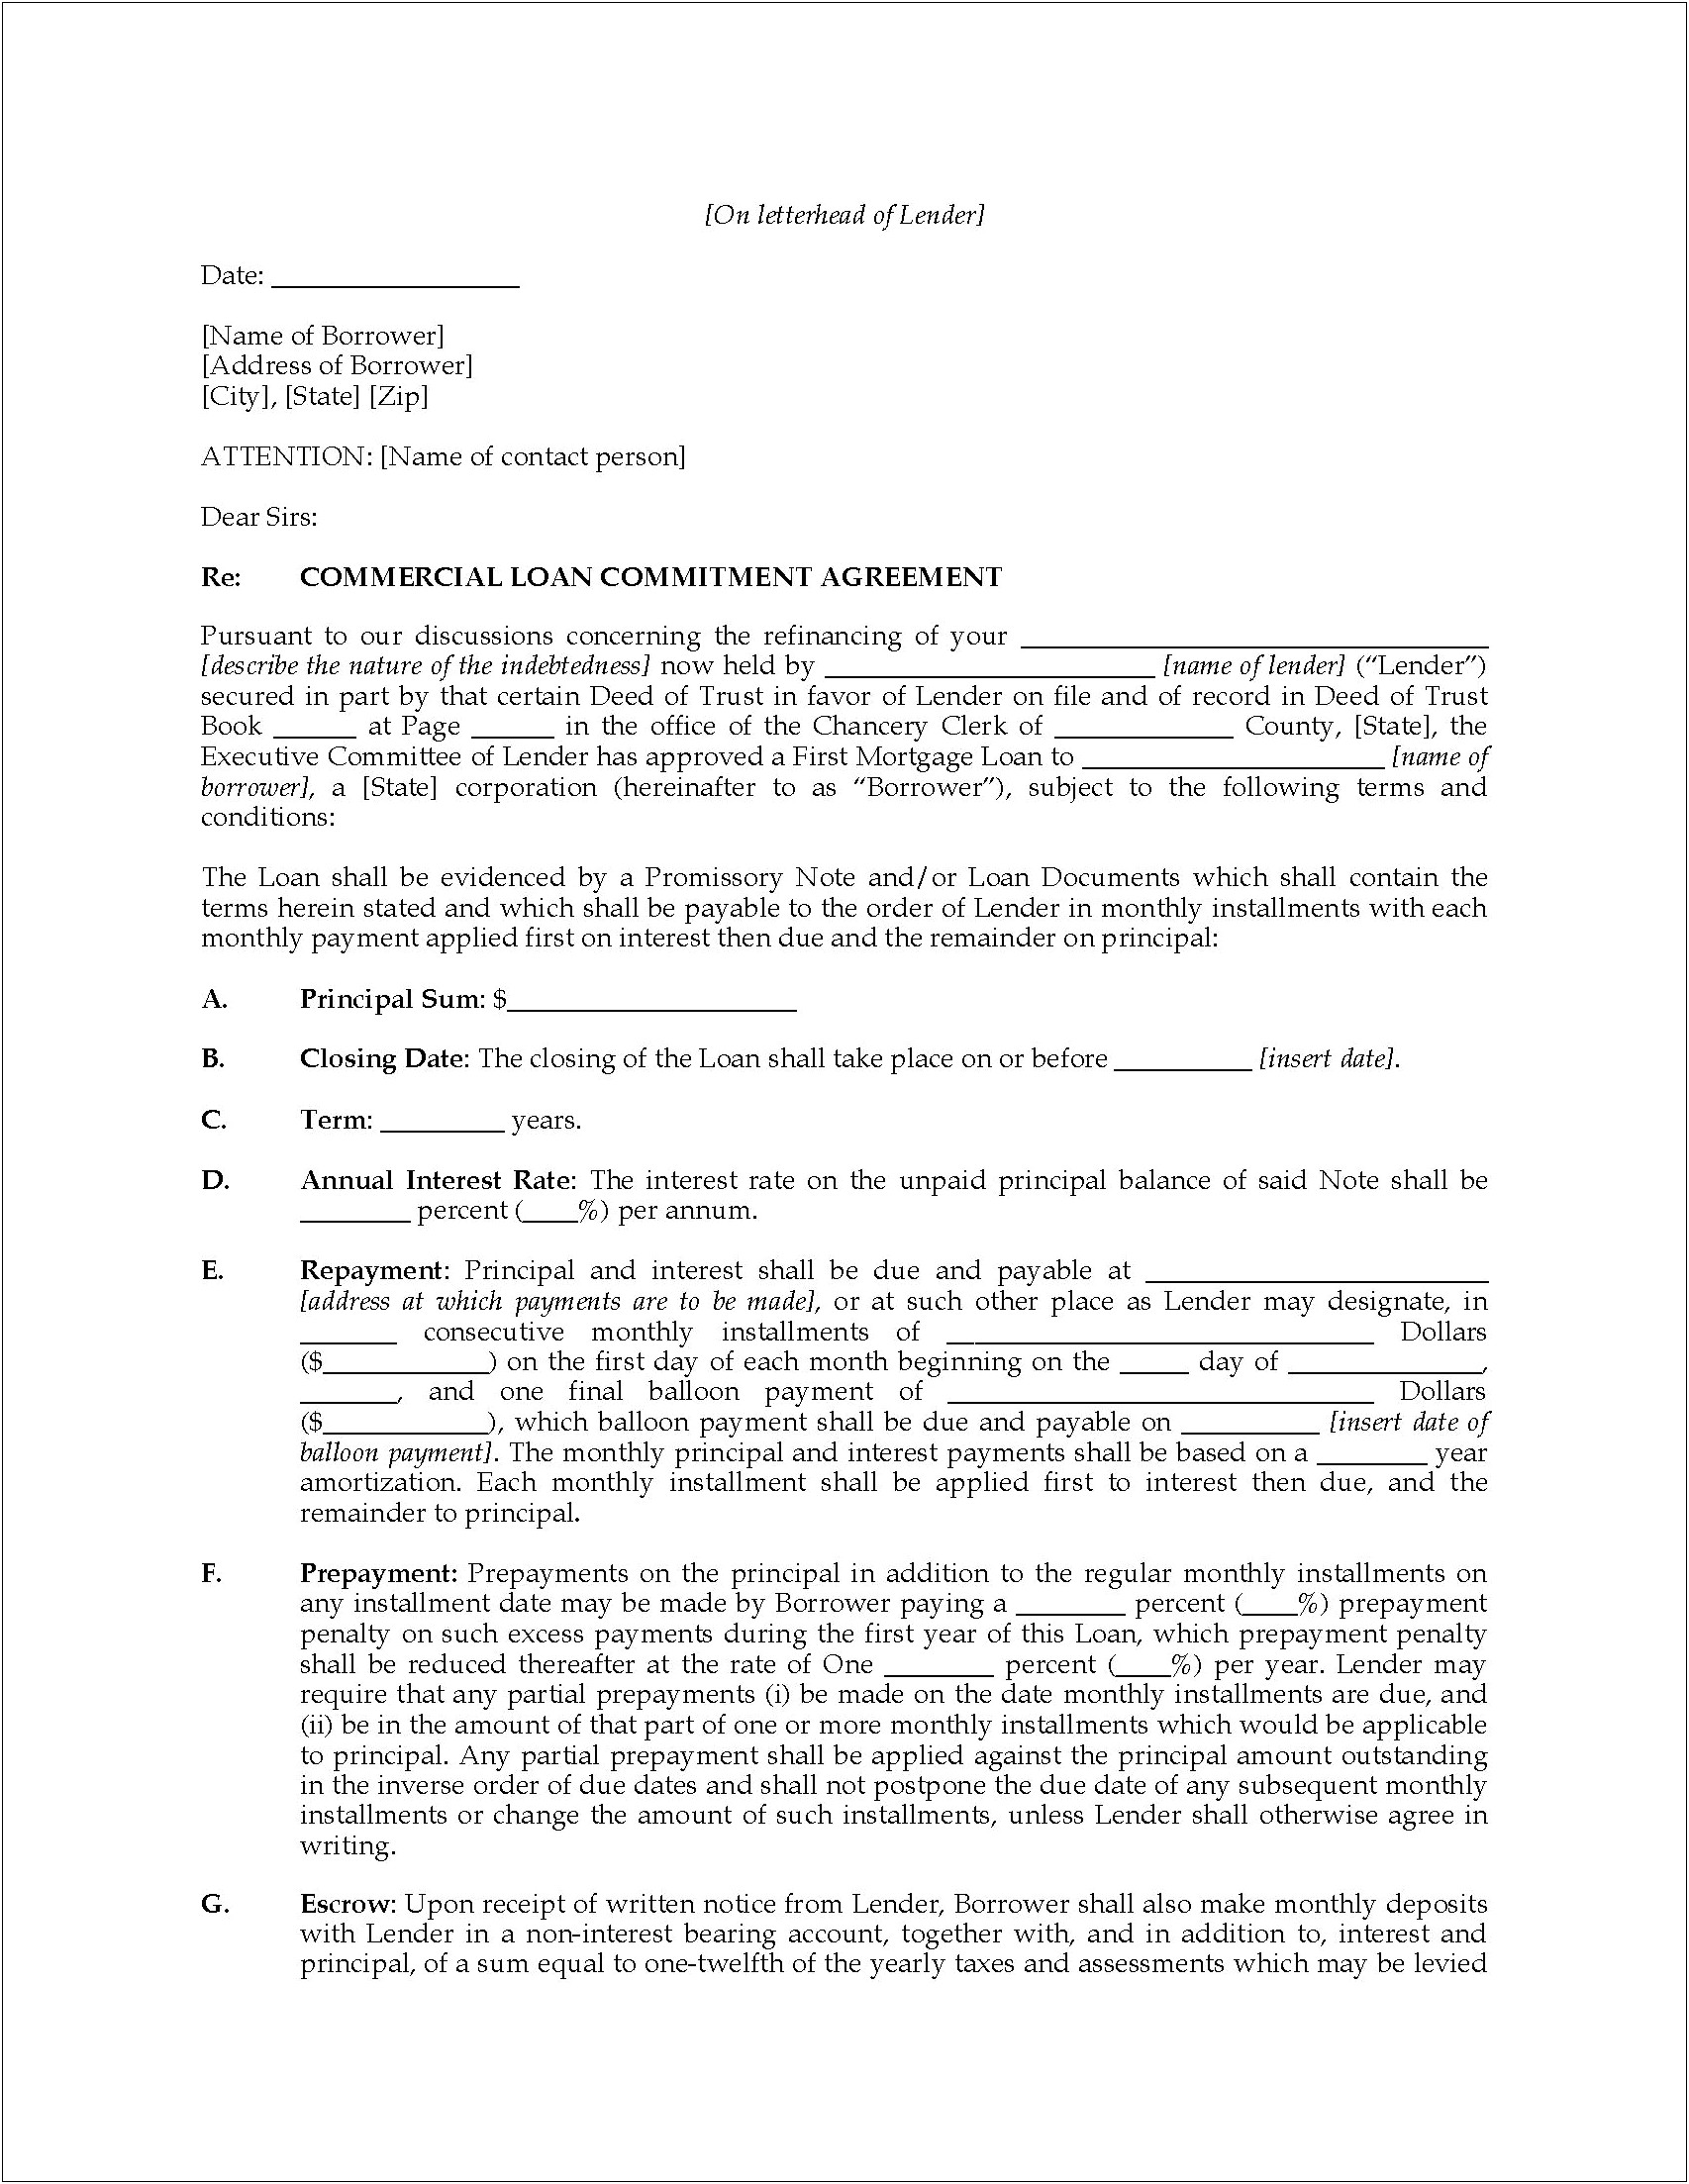 Financial Commitment Letter Of Intent Template